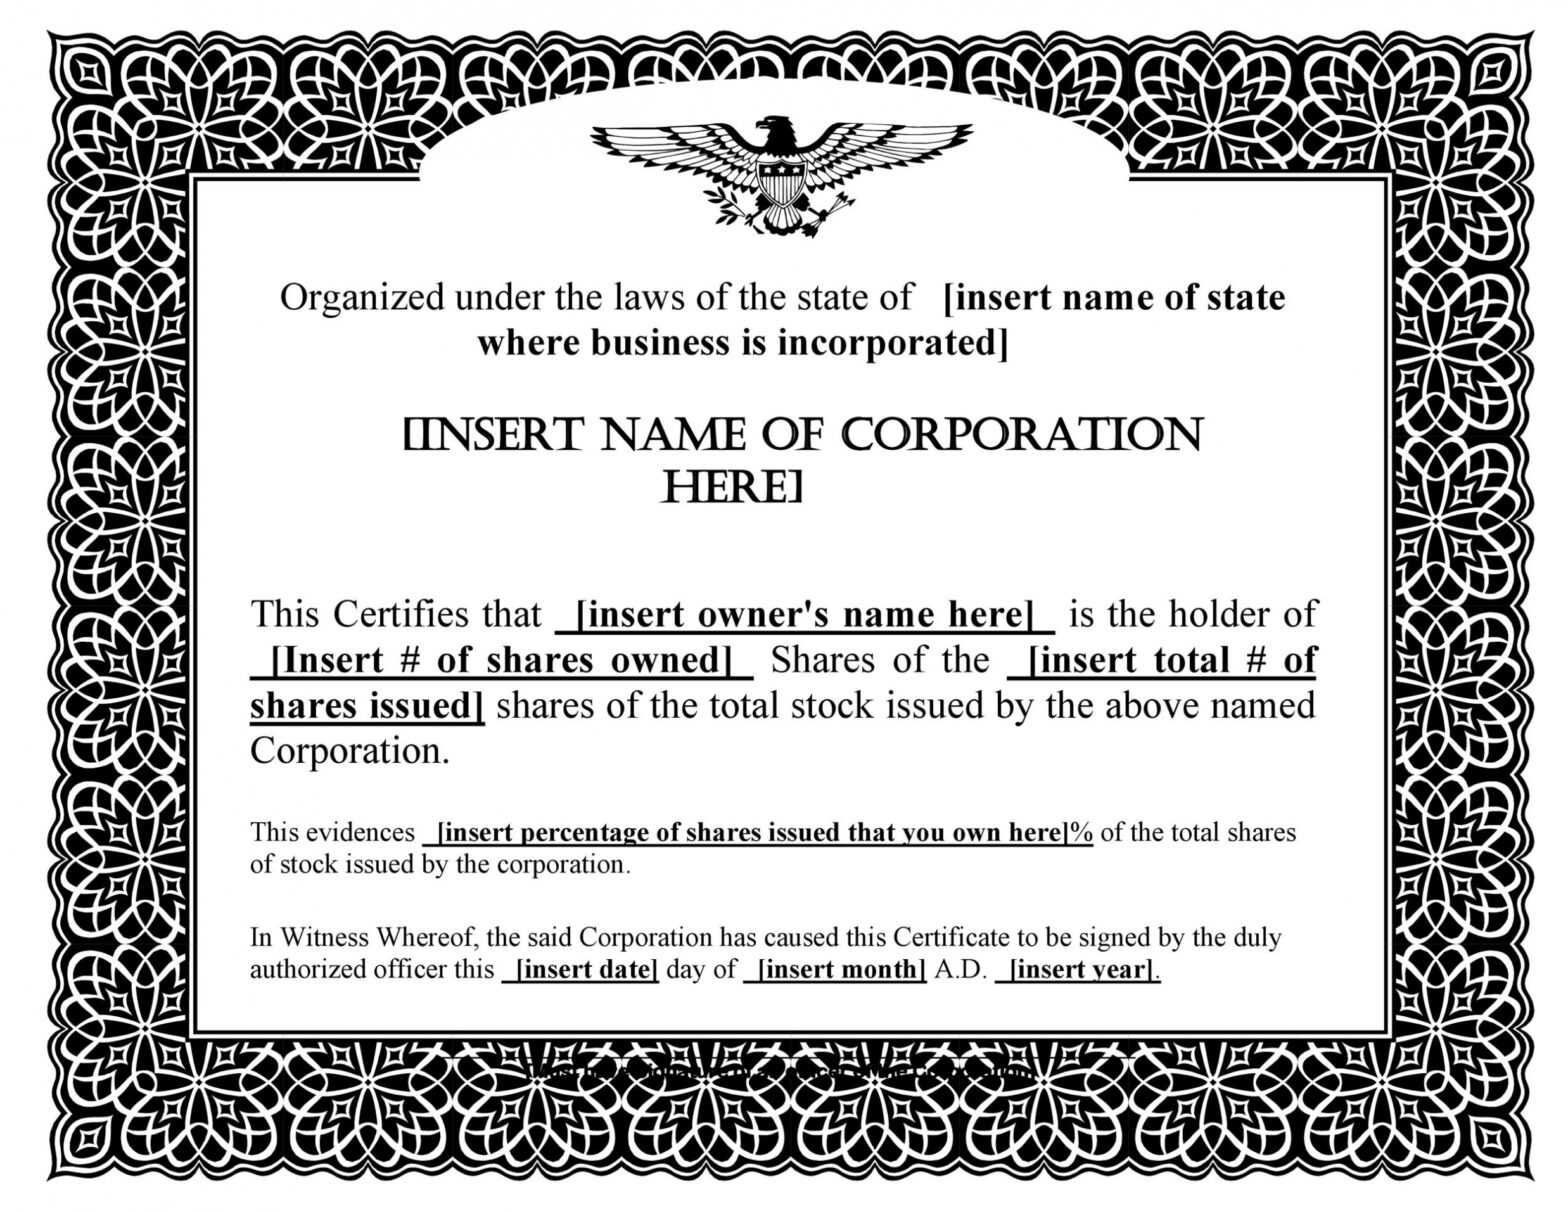 40+ Free Stock Certificate Templates (Word, Pdf) ᐅ Templatelab within Corporate Share Certificate Template